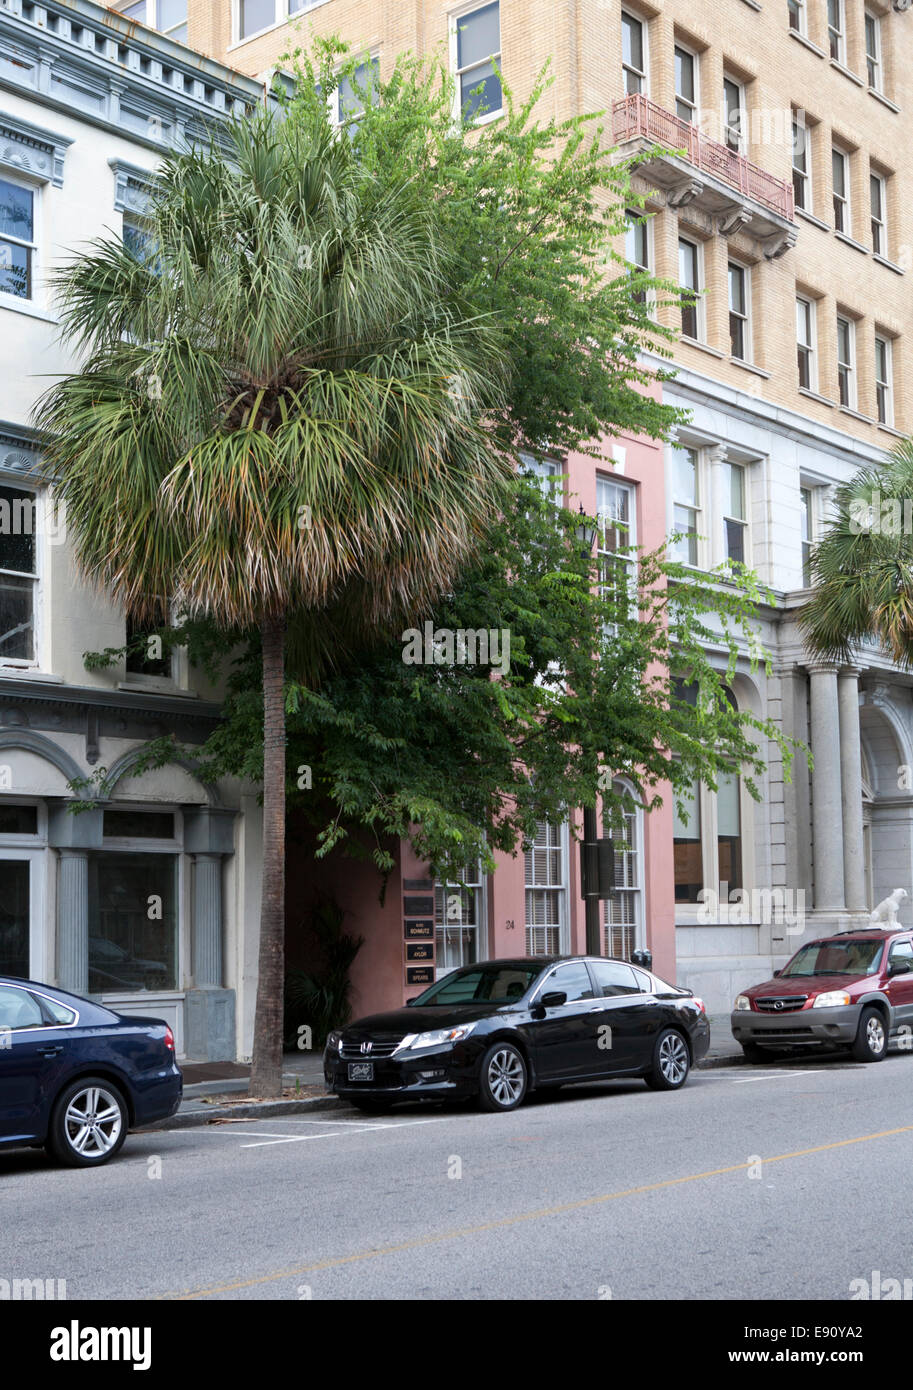 Storefronts and palm trees in downtown Charleston, South Carolina. Stock Photo